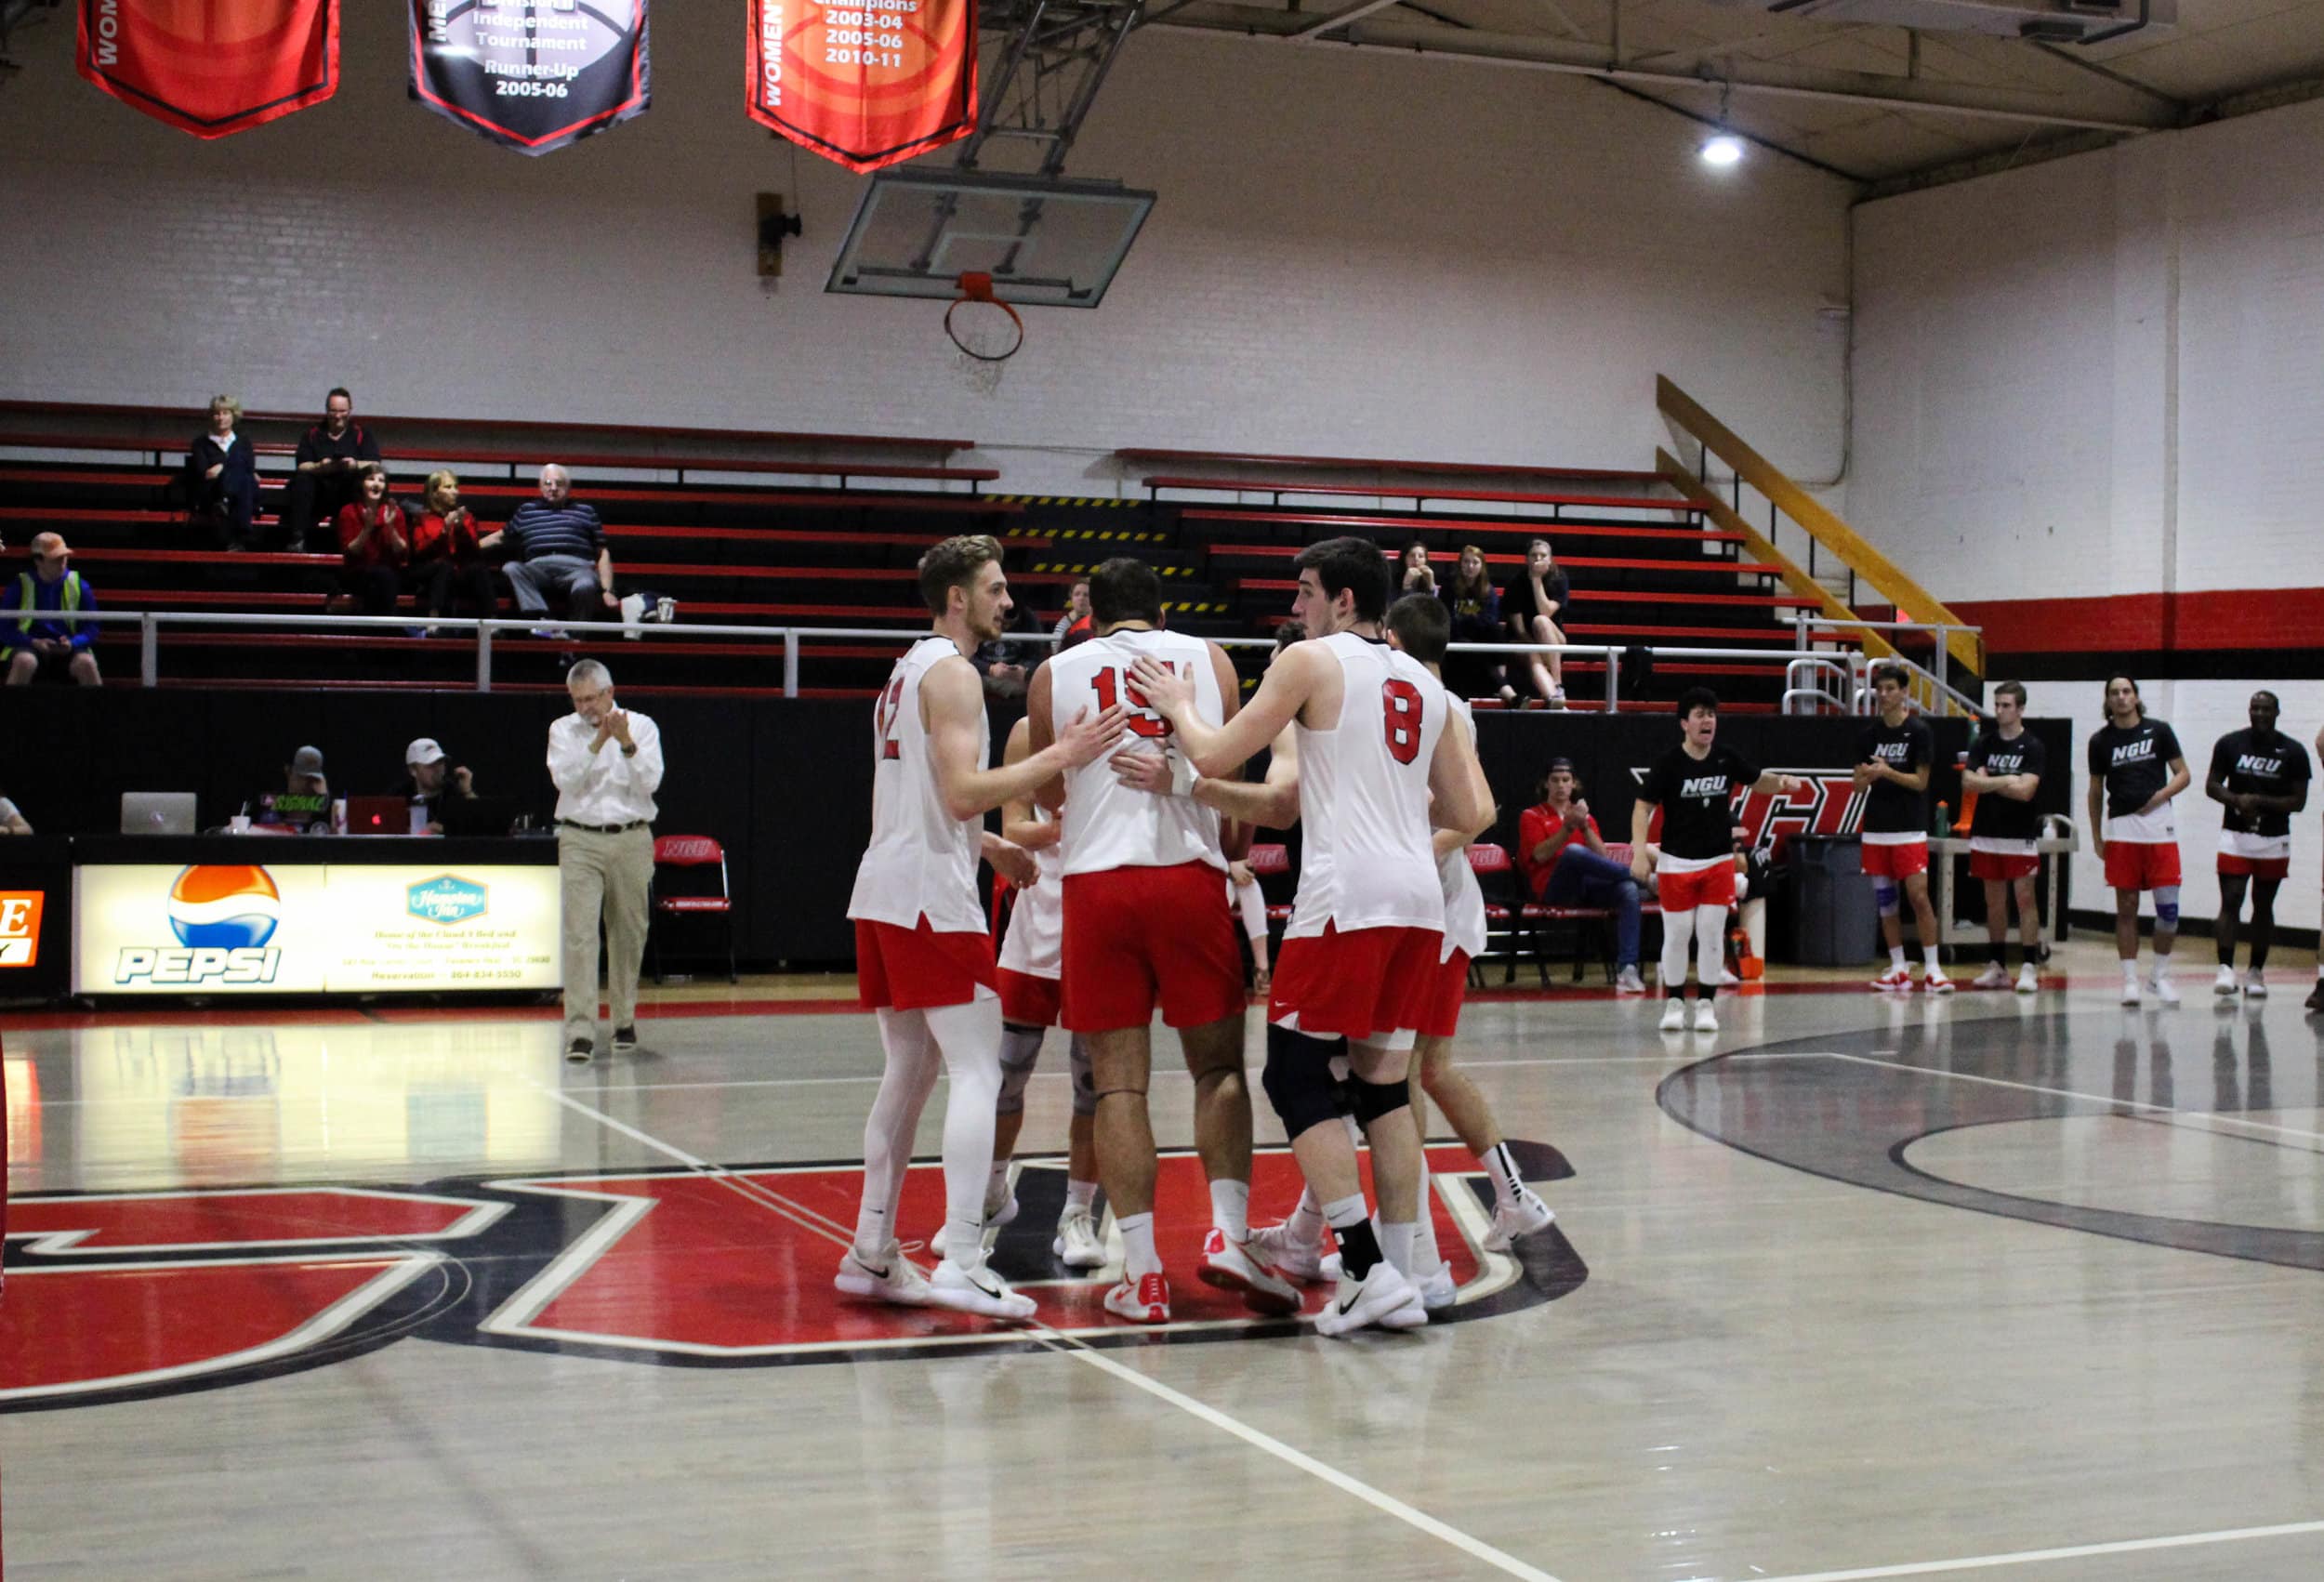 The NGU Mens Volleyball team congratulate Matthew McManaway (15) after he spiked the ball over the net scoring the Crusaders a point.